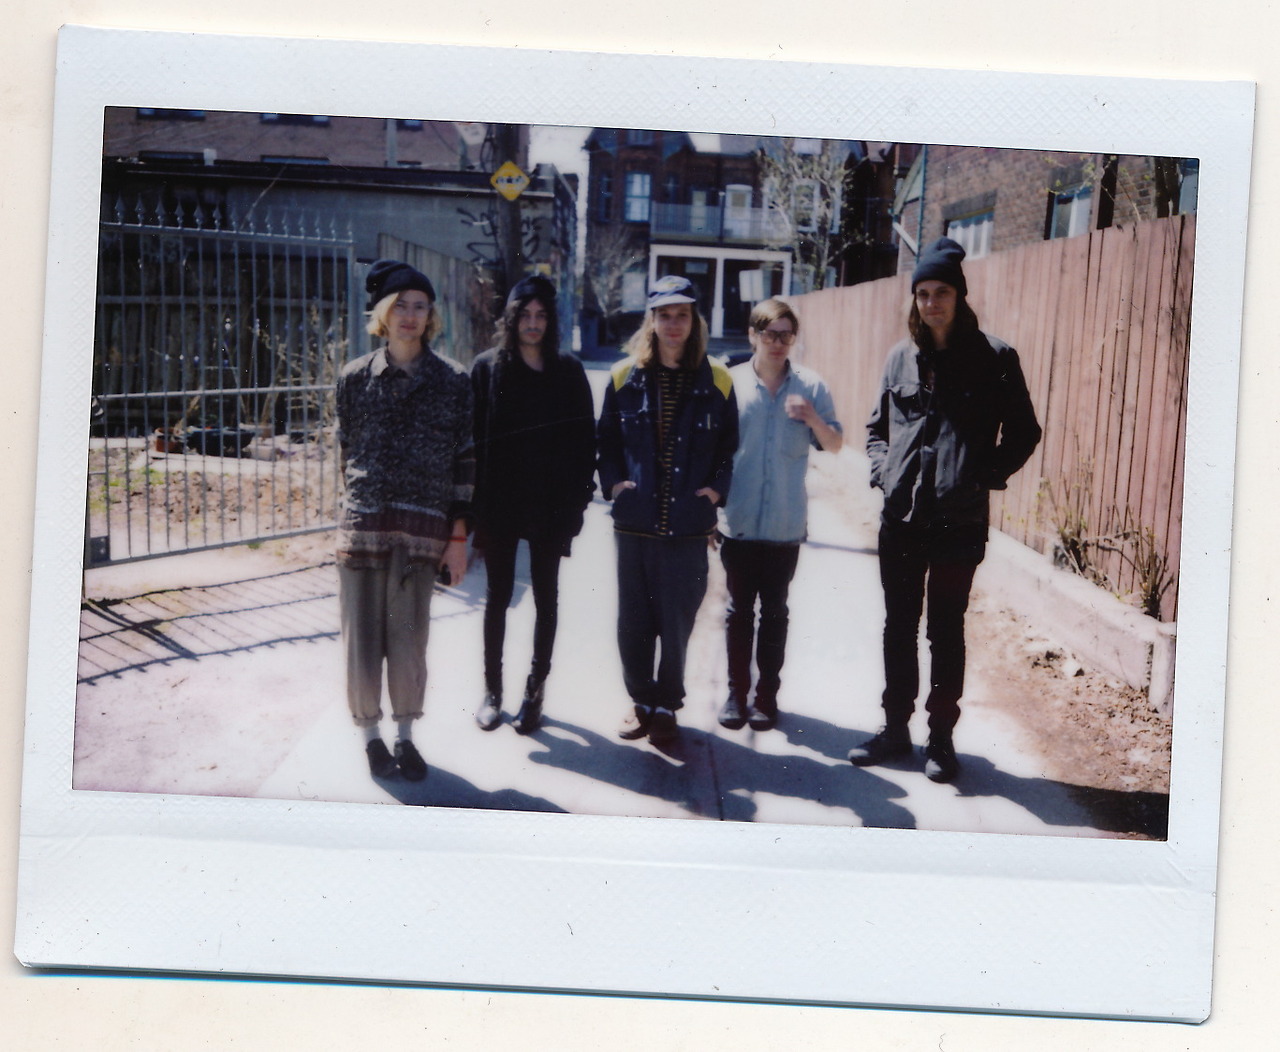 promotional picture of the band Diiv